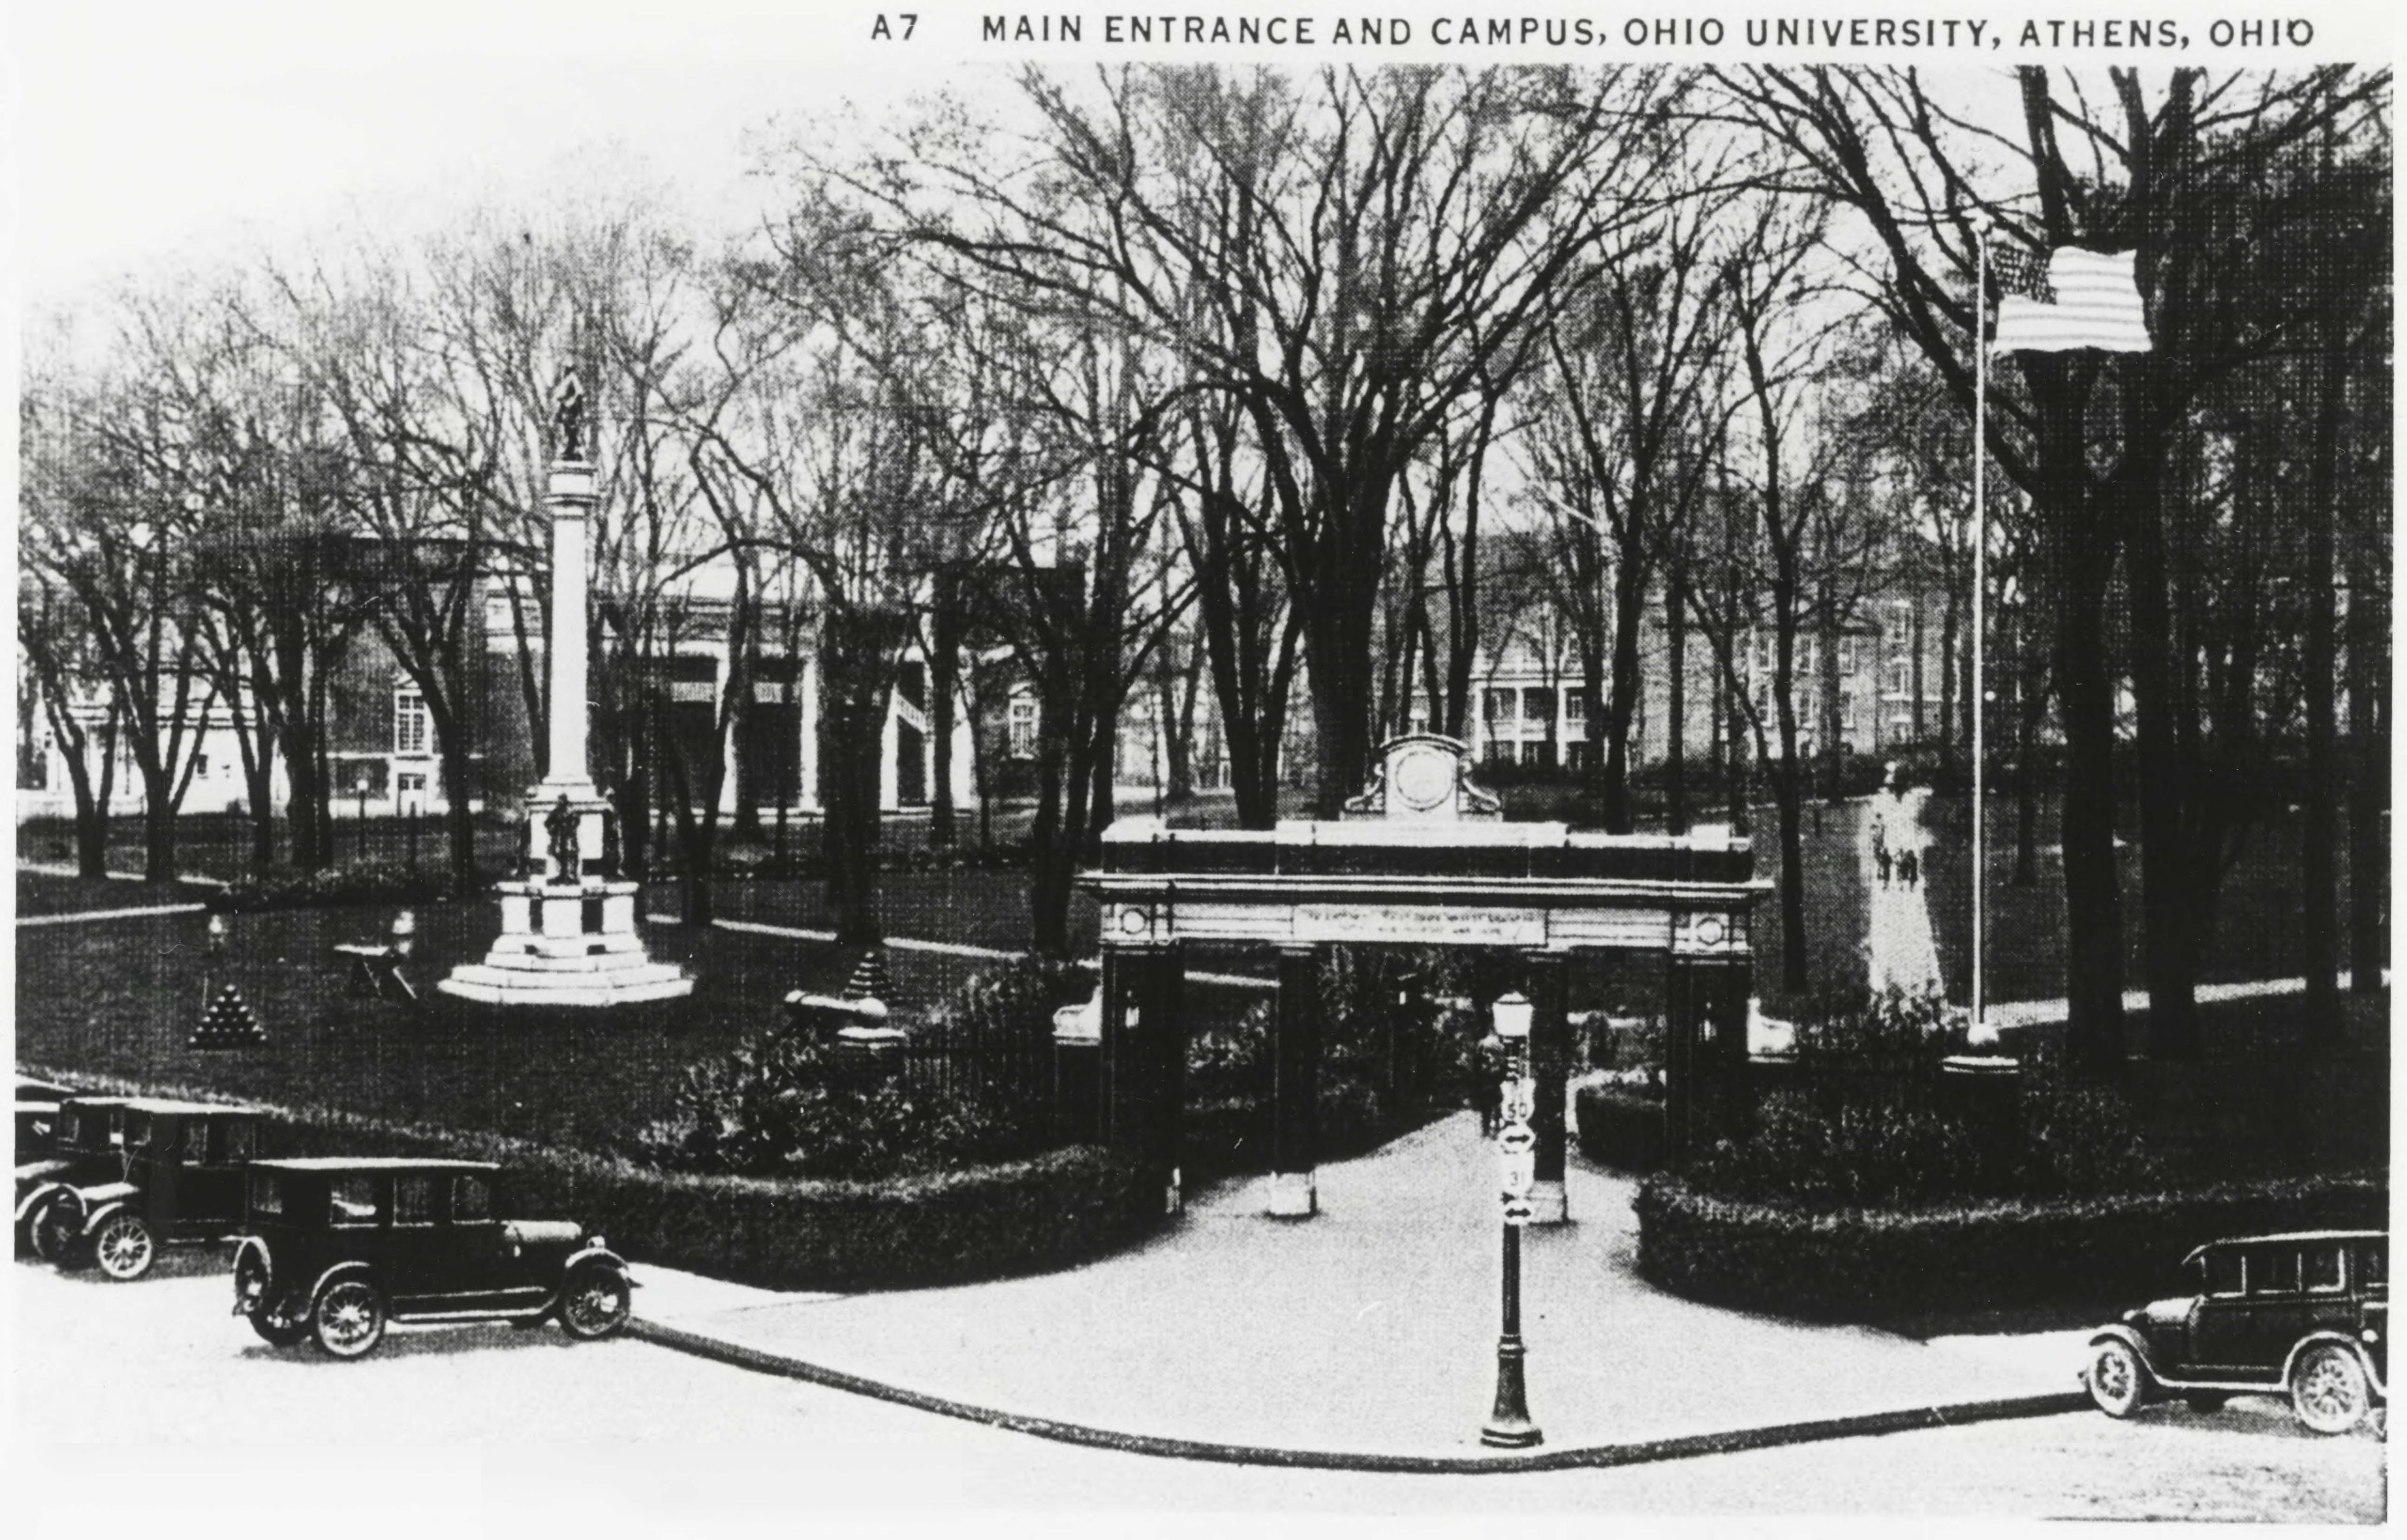 The Alumni Gateway, built in 1915, welcomed individuals to College Green. The monument and its cannons and cannonballs can be seen on the left in this photo circa the 1920s. Photo courtesy the Mahn Center for Archives & Special Collections